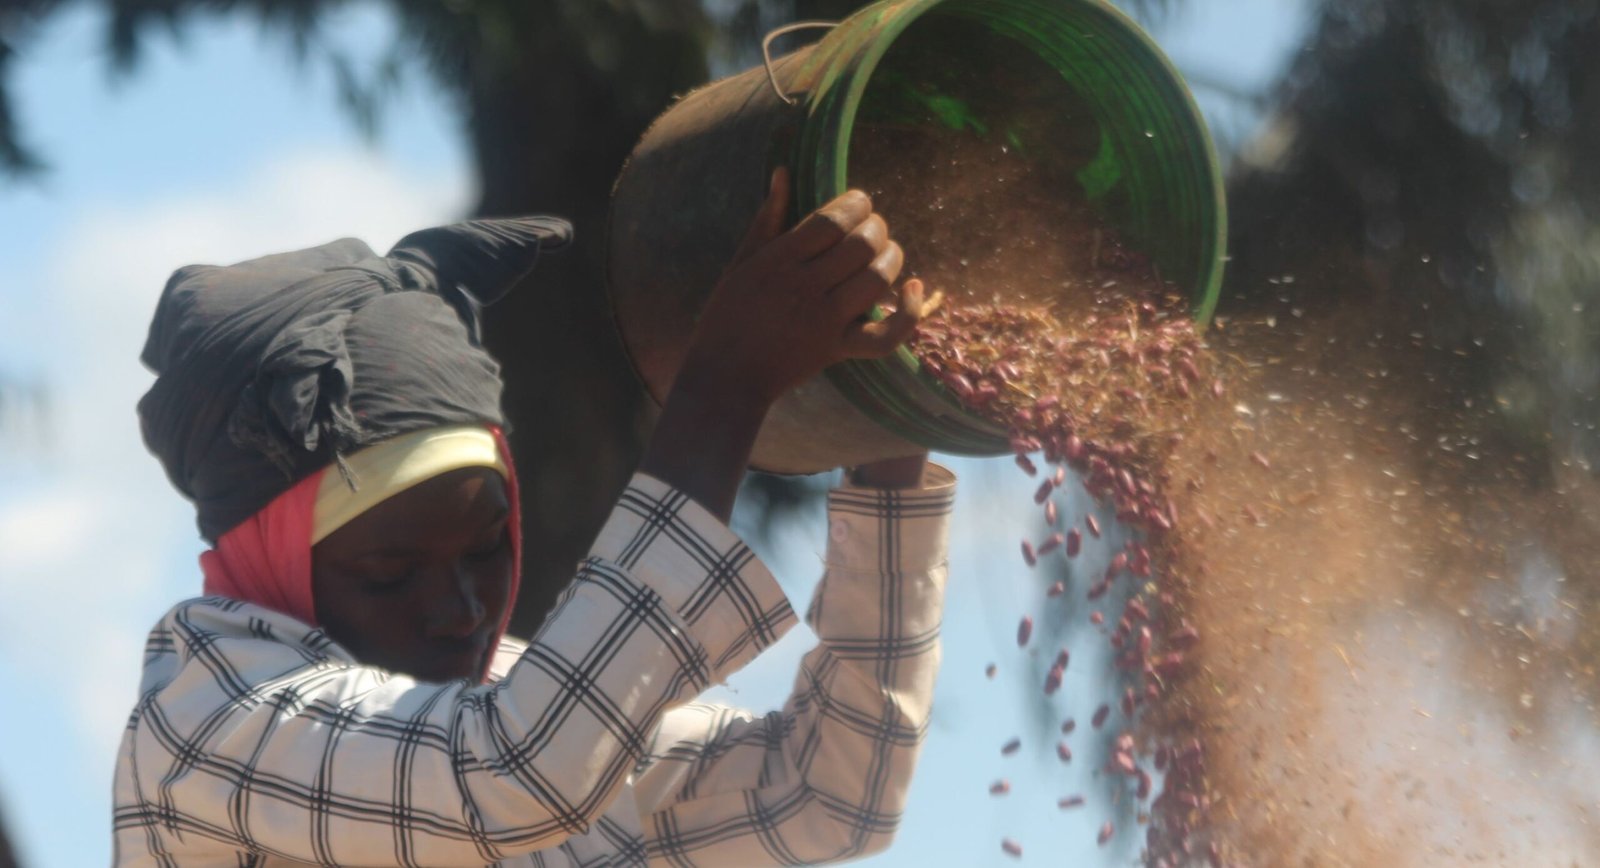 AMDT elevates smallholder farmers in the Africa Food Systems Forum 2023